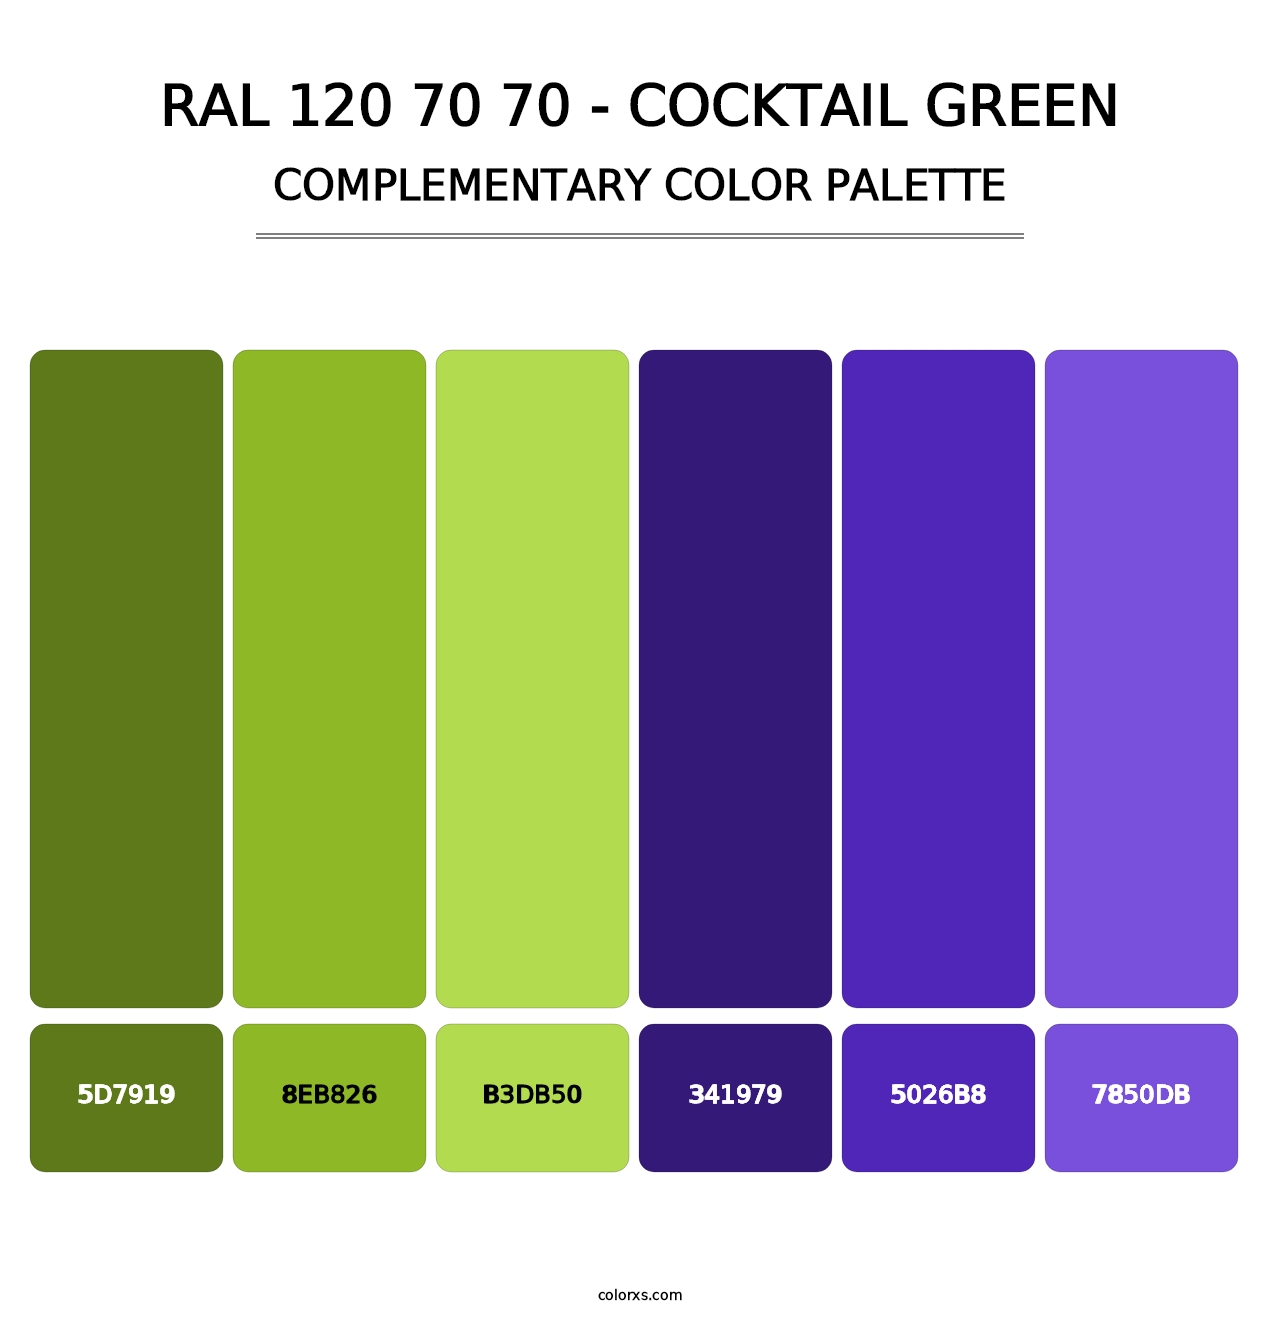 RAL 120 70 70 - Cocktail Green - Complementary Color Palette